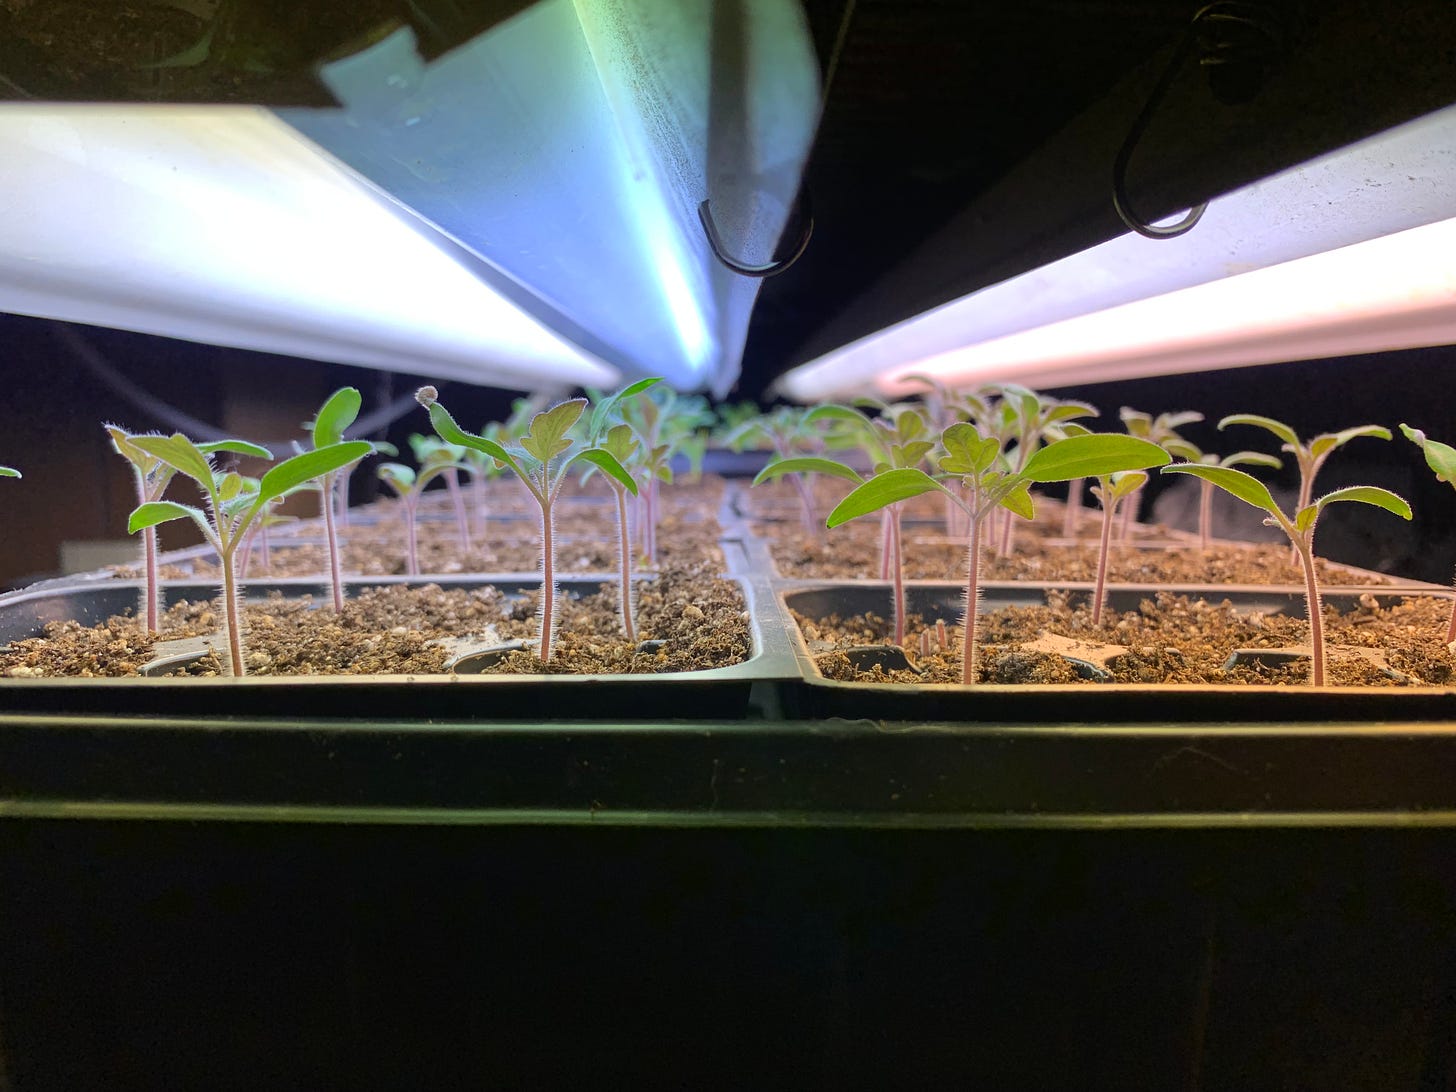 A seed tray with tiny tomato plants under lights